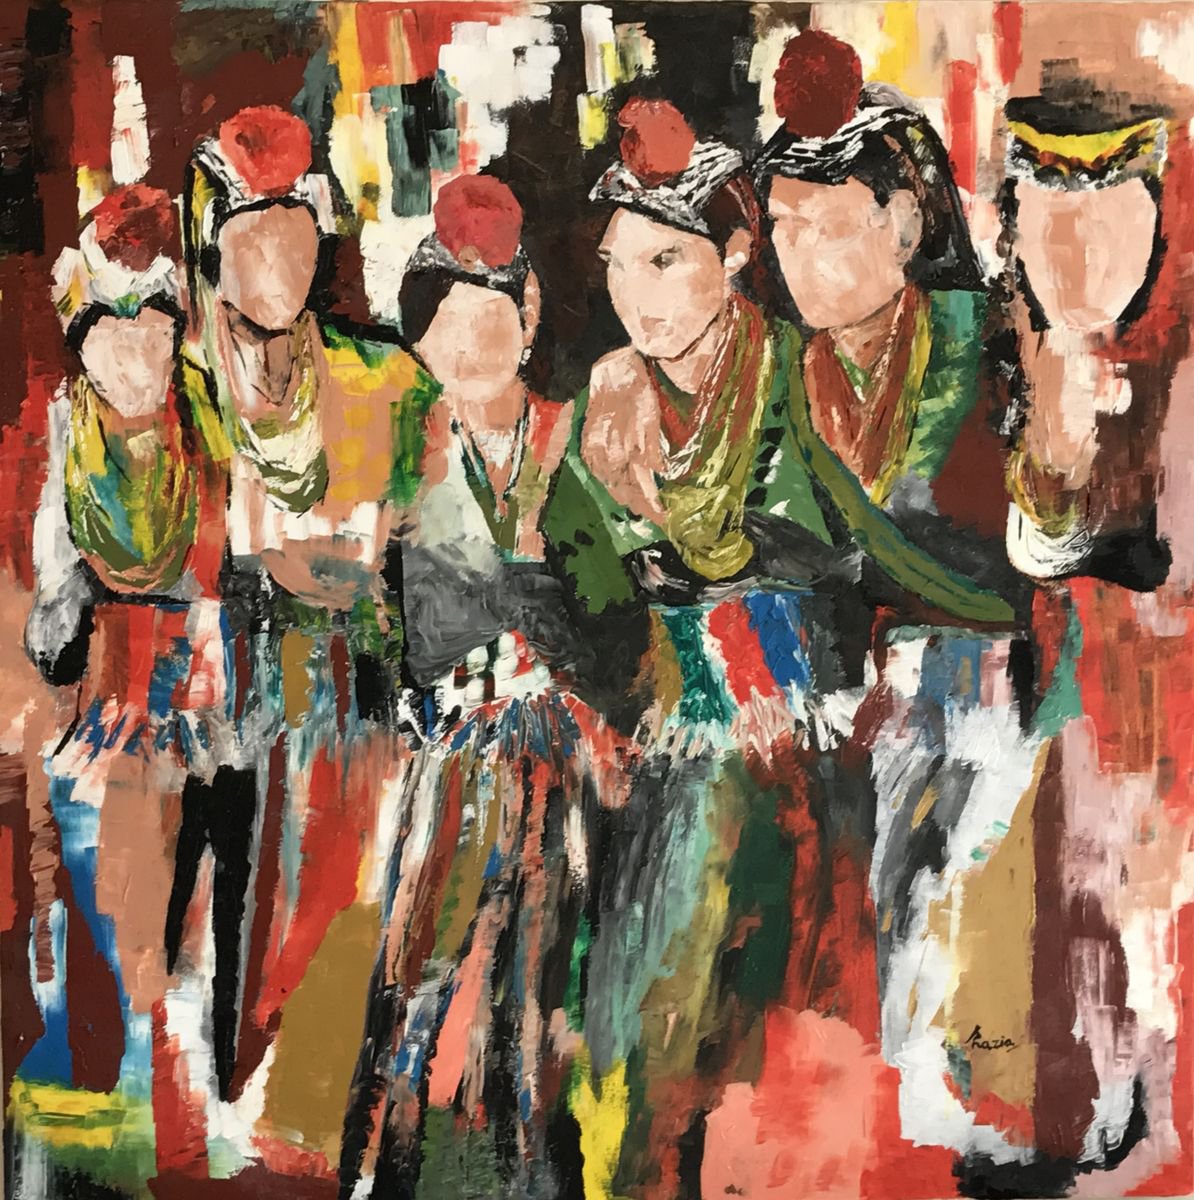 Kalash (The White Tribe) by Shazia Noor Mufti